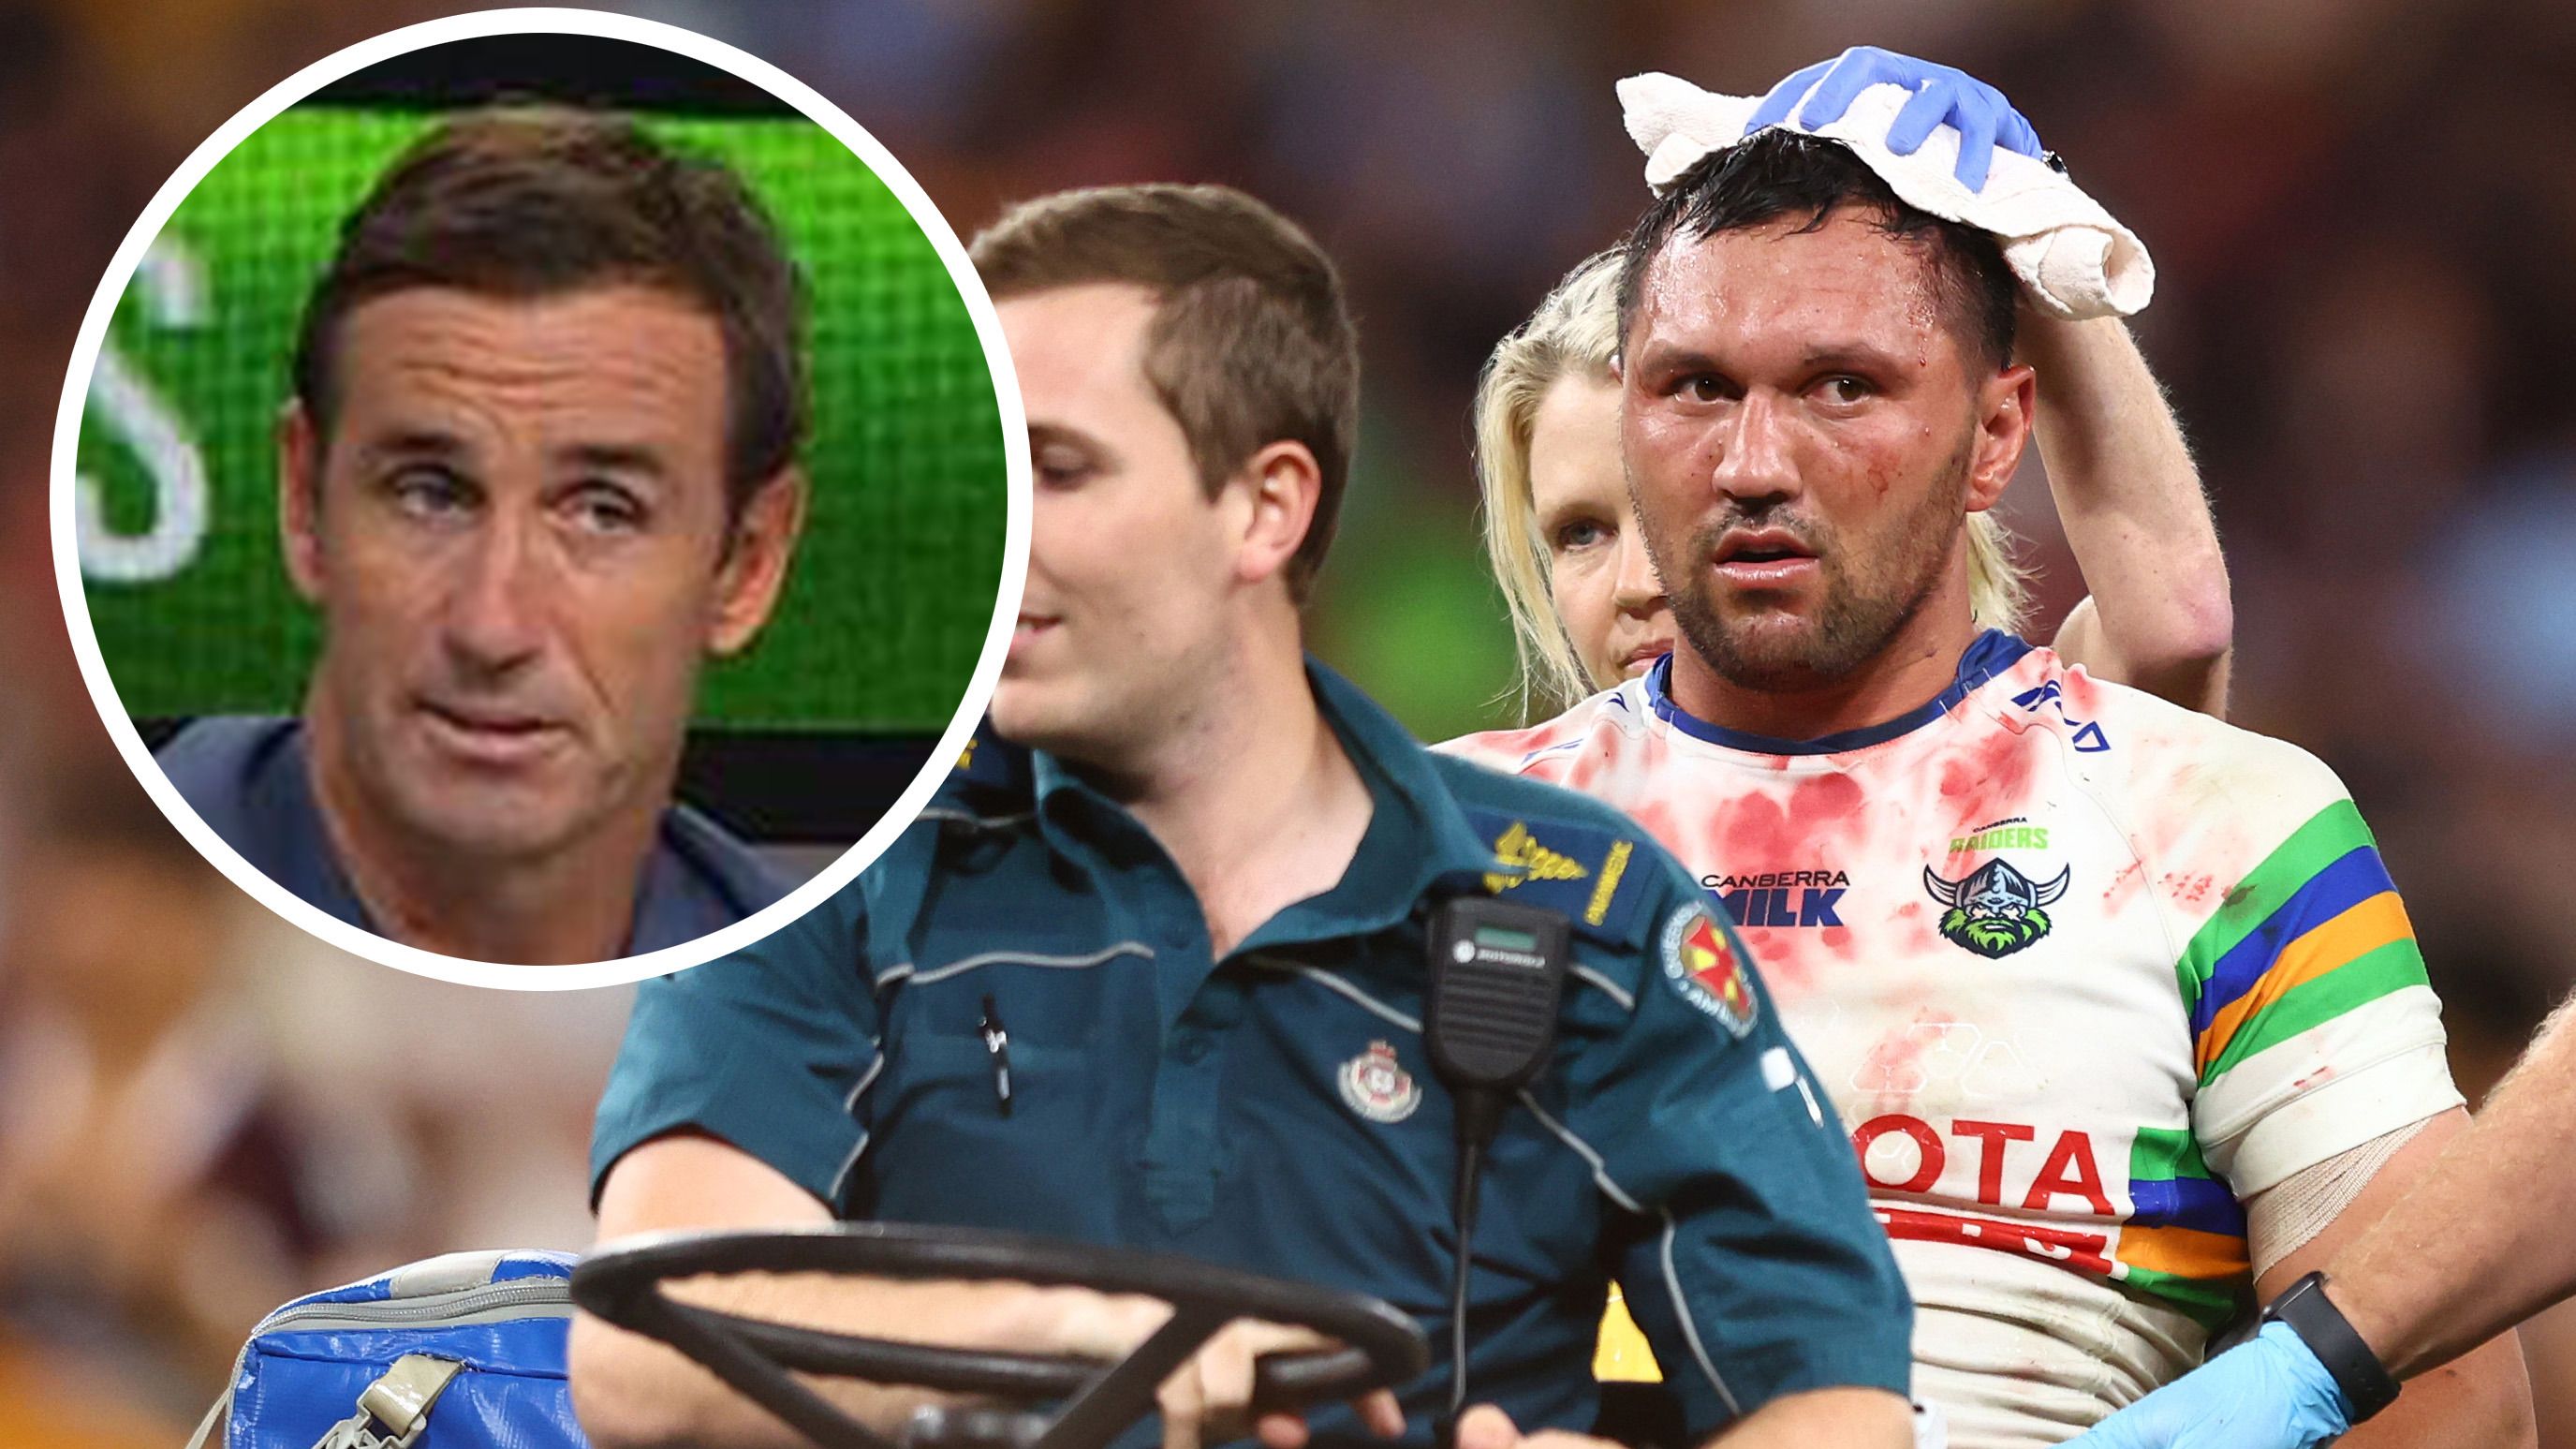 Legends clash over 'totally reckless' act that left star bloodied and bruised